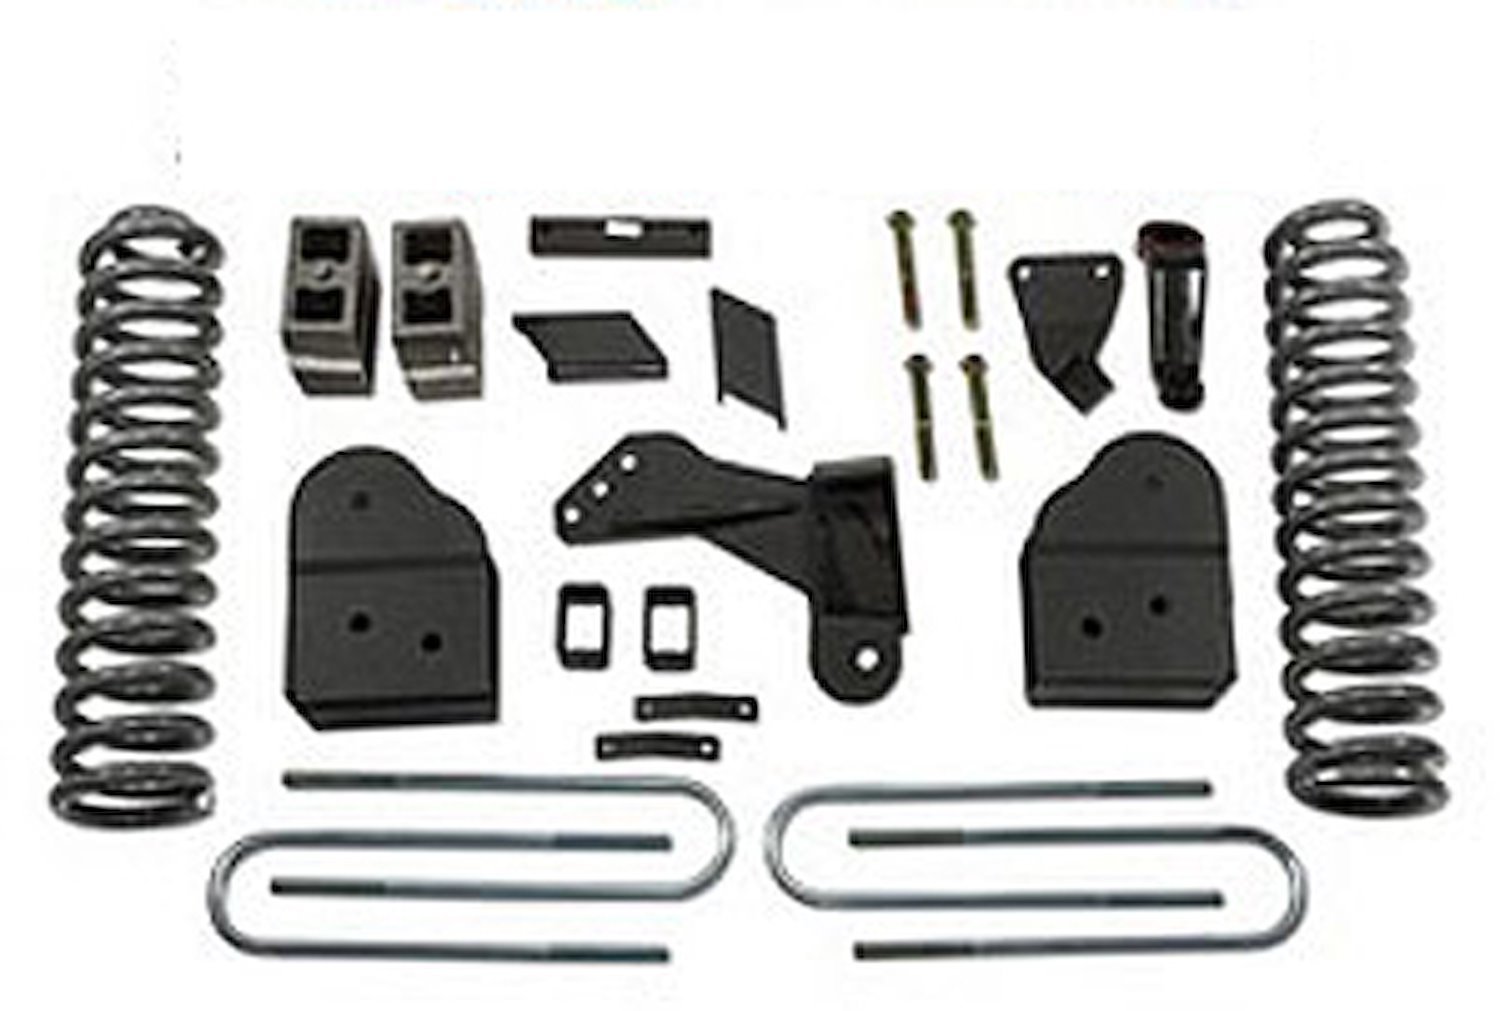 Suspension Lift Kit 2008-16 Ford F250/350 4wd